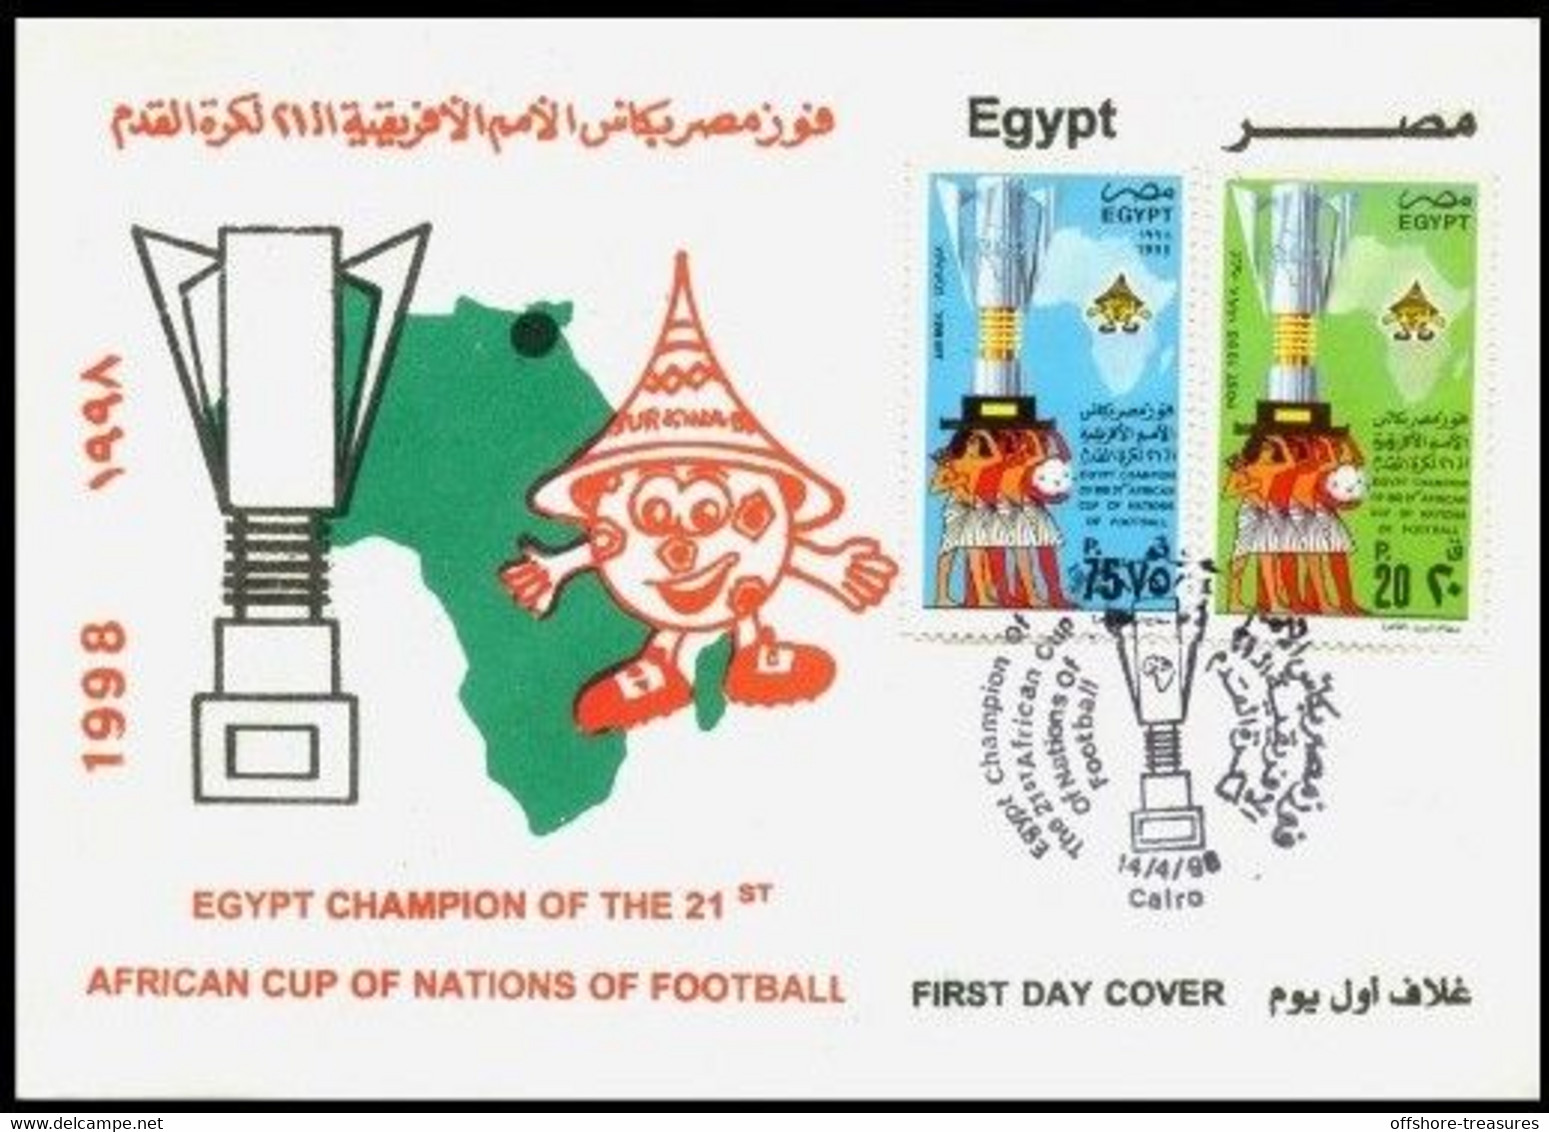 Egypt FOOTBALL WINNER 1998 First Day Cover - FDC 2 Stamps 75P & 20P AFRICAN NATIONS CUP BURKINA FASO - Storia Postale